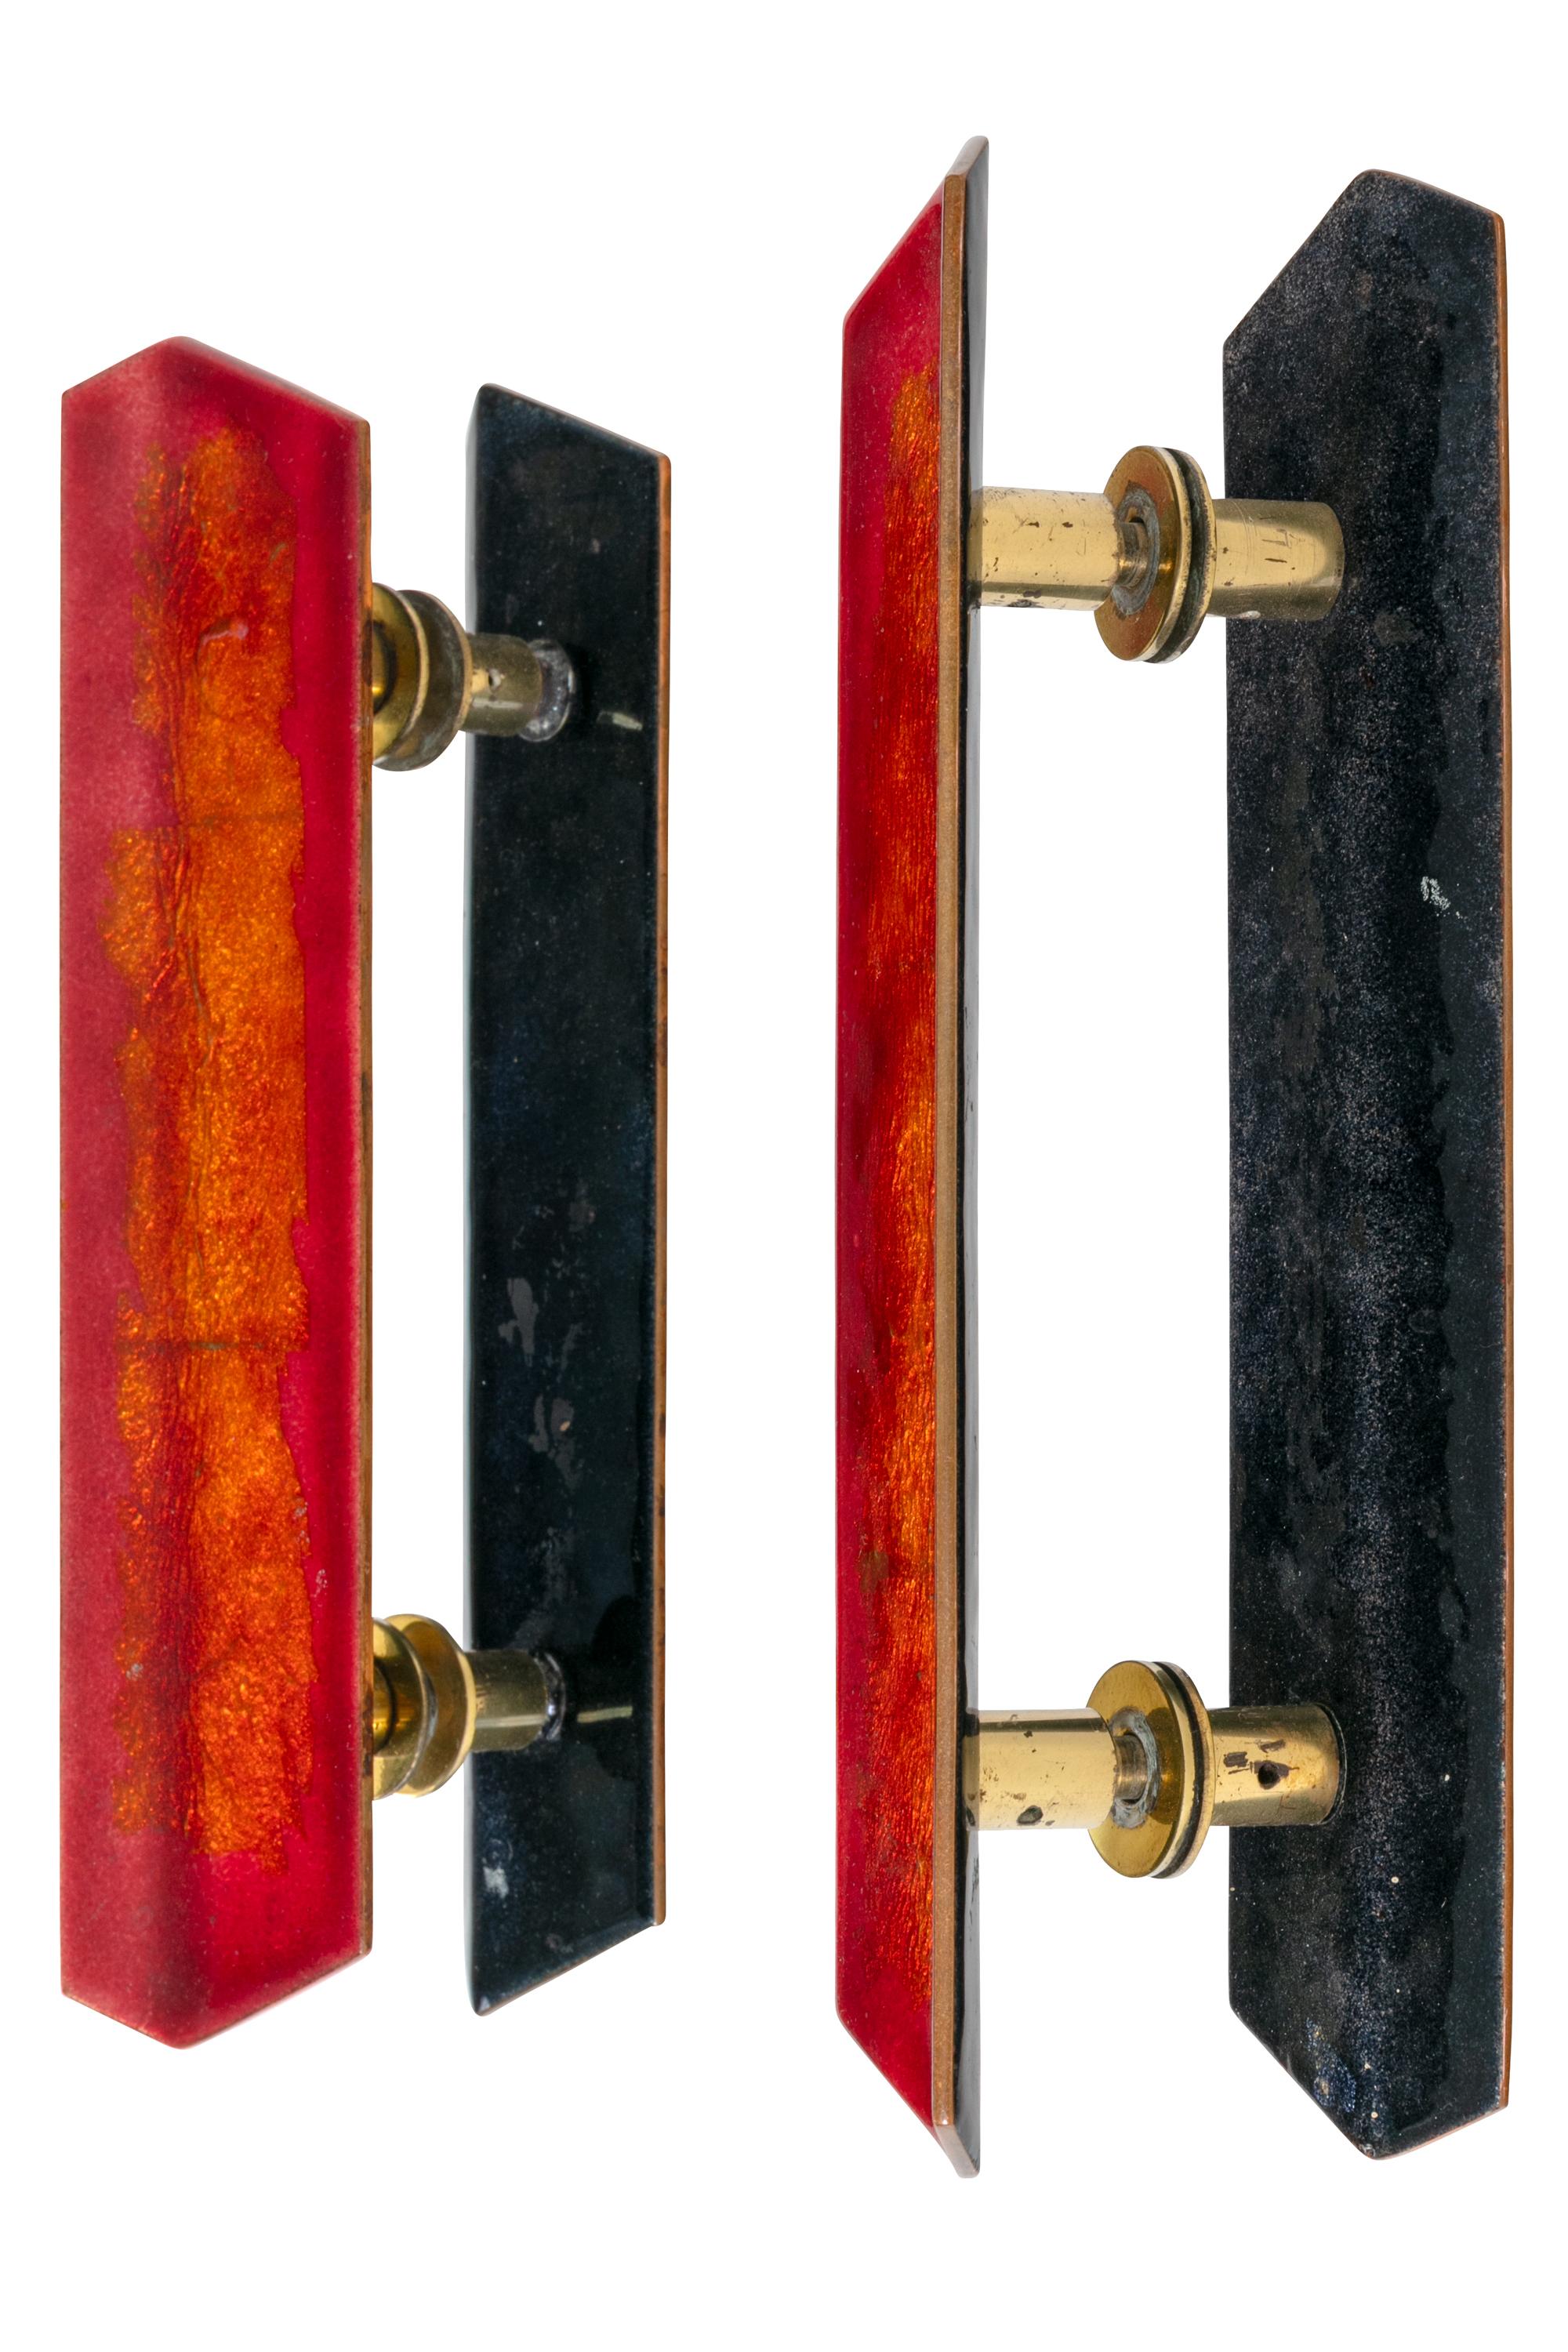 Paolo De PaolI was an artisan as well and entrepreneur and designer. His enamel door pulls were so popular they were being commissioned in large quantity from many of the renown architects of the period including Gio Ponti.  Only one of the two sets